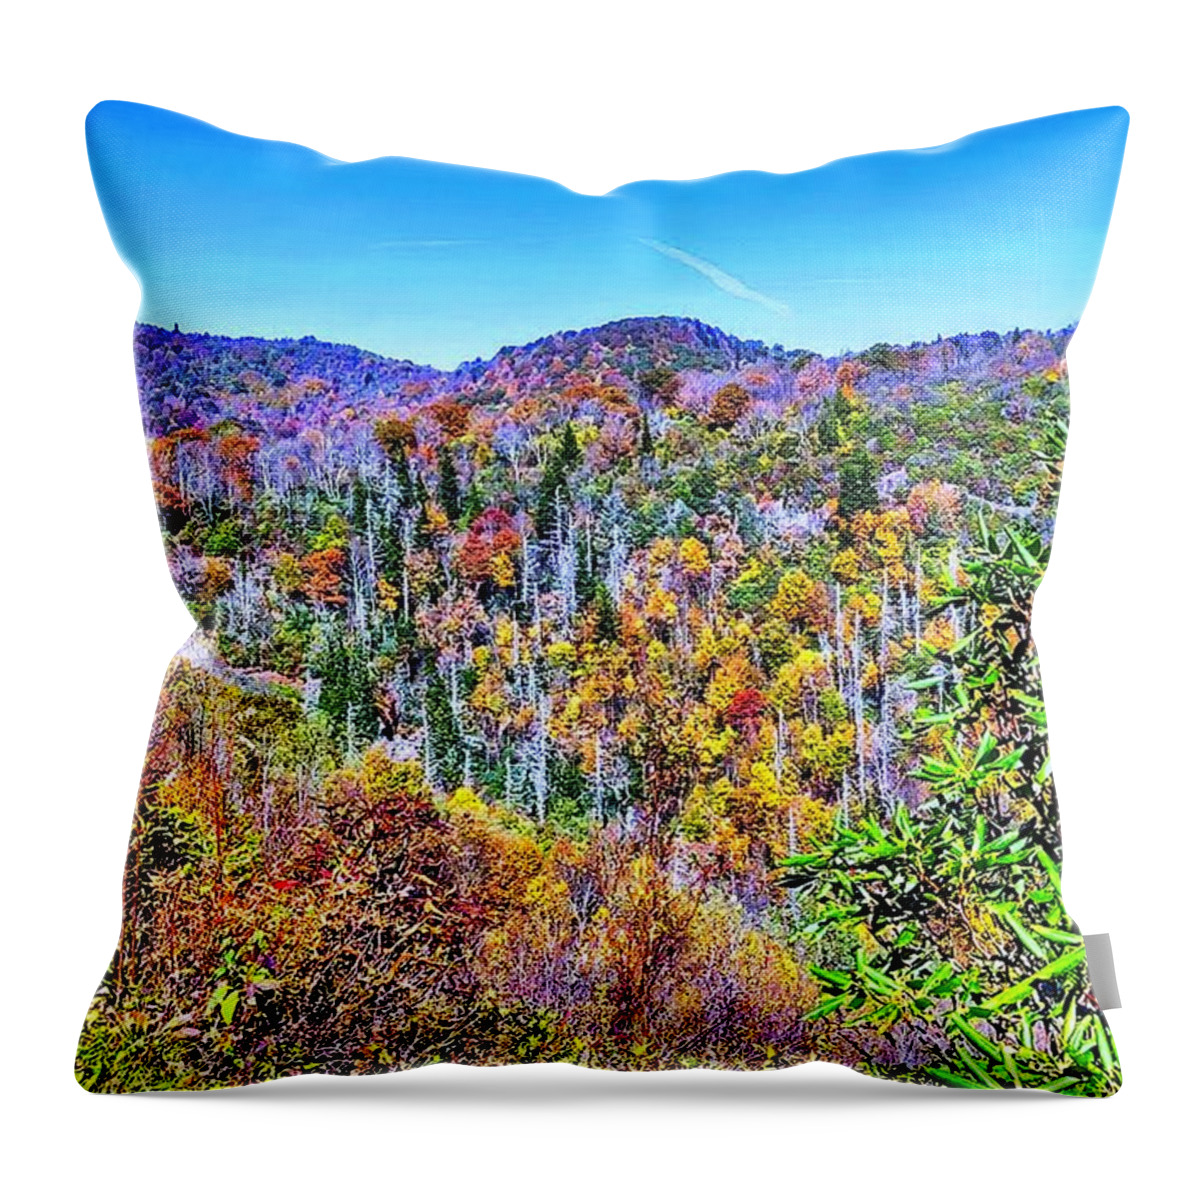 Autumn Throw Pillow featuring the photograph Autumn Colors by Allen Nice-Webb